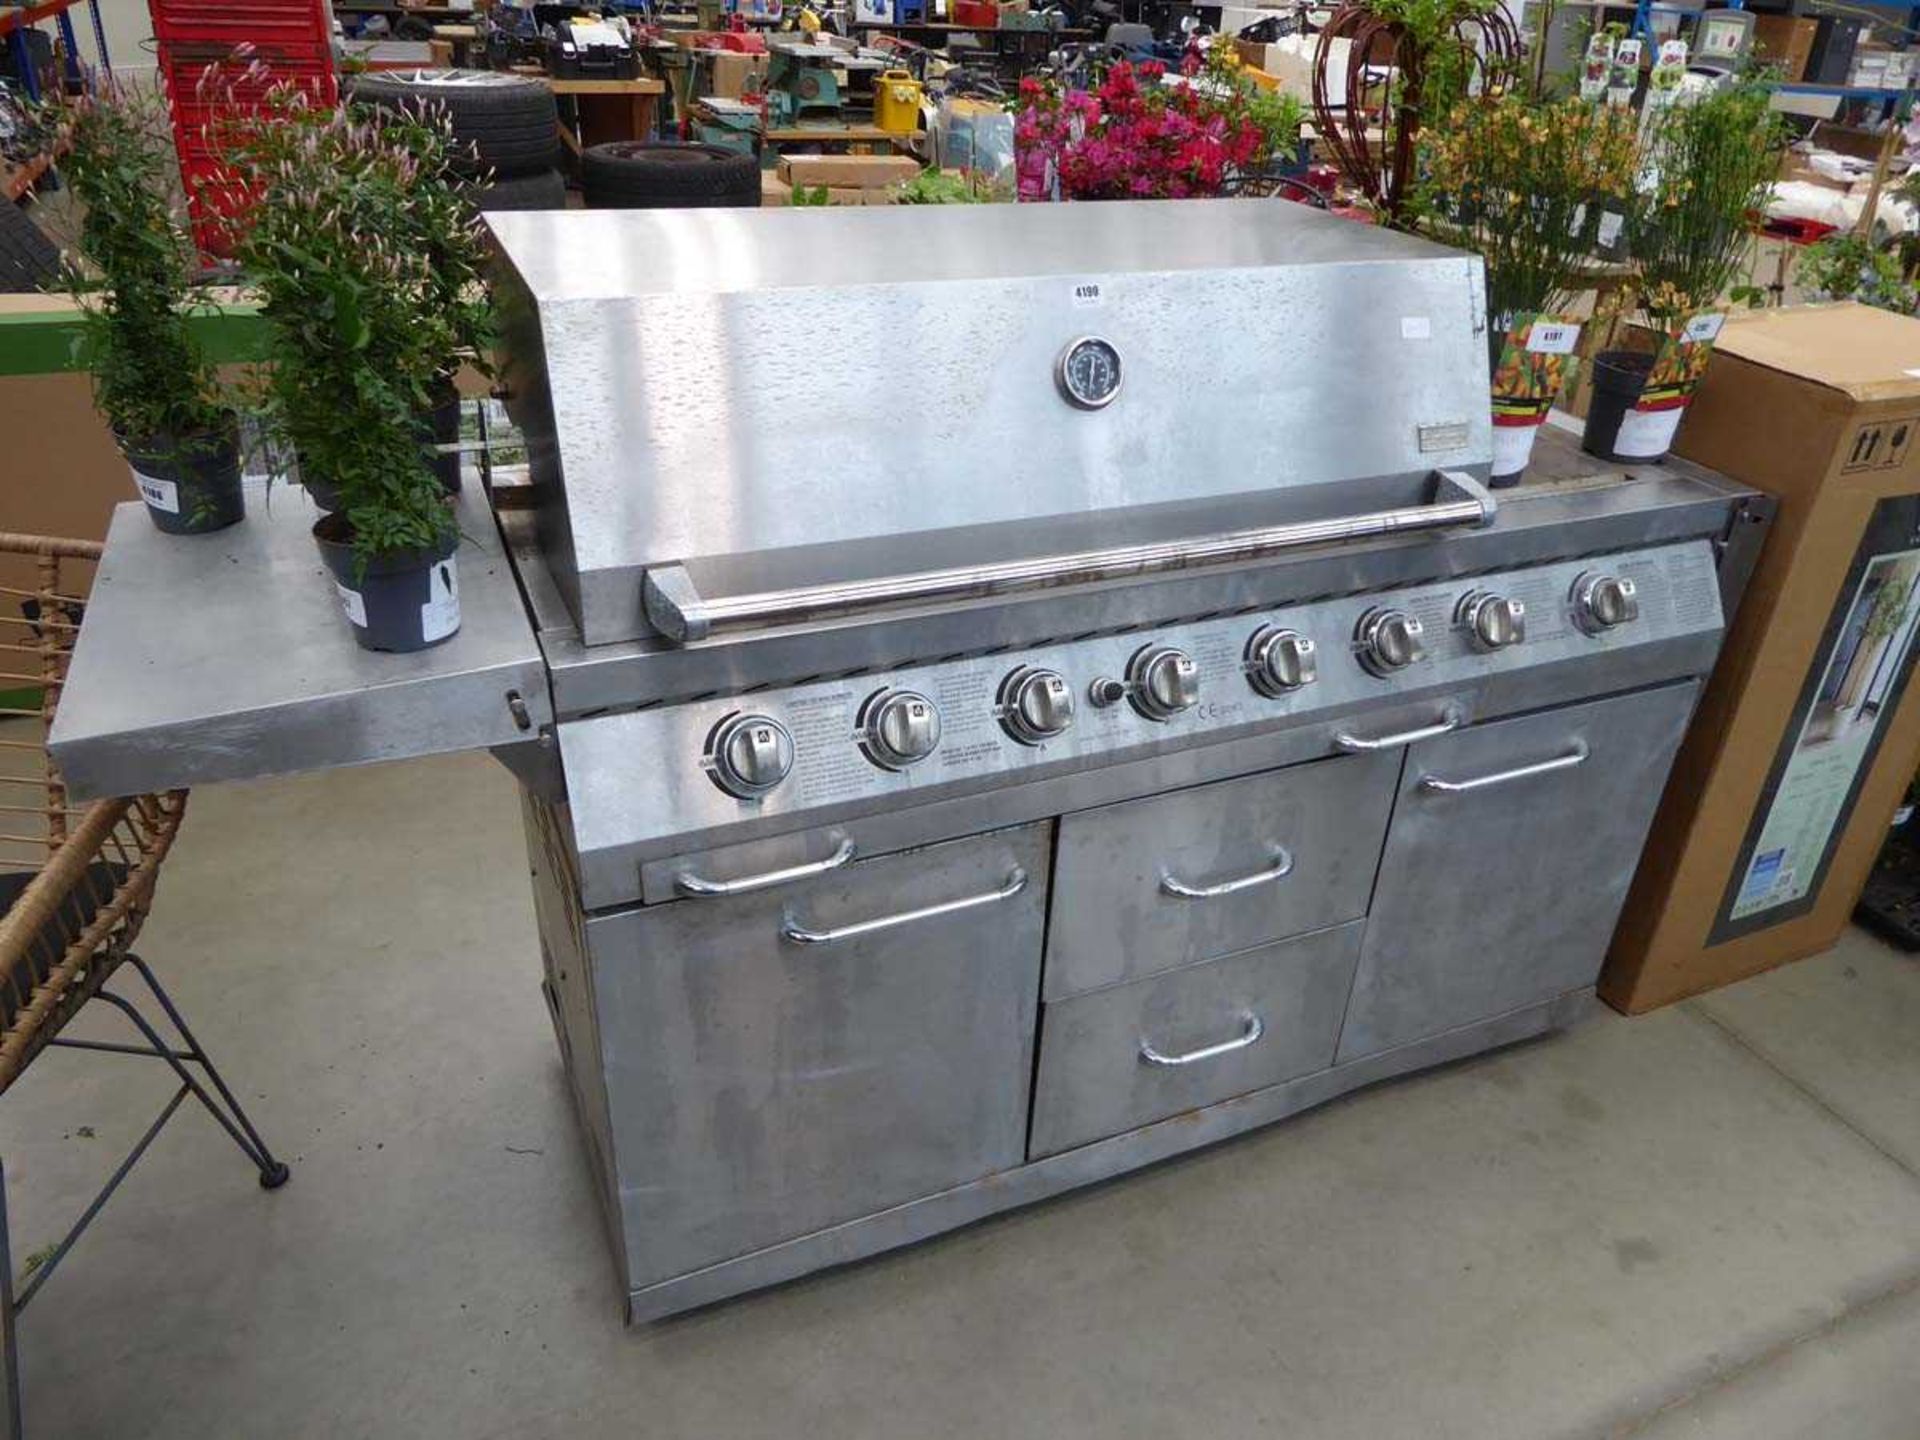 Swiss Grill stainless steel gas BBQ